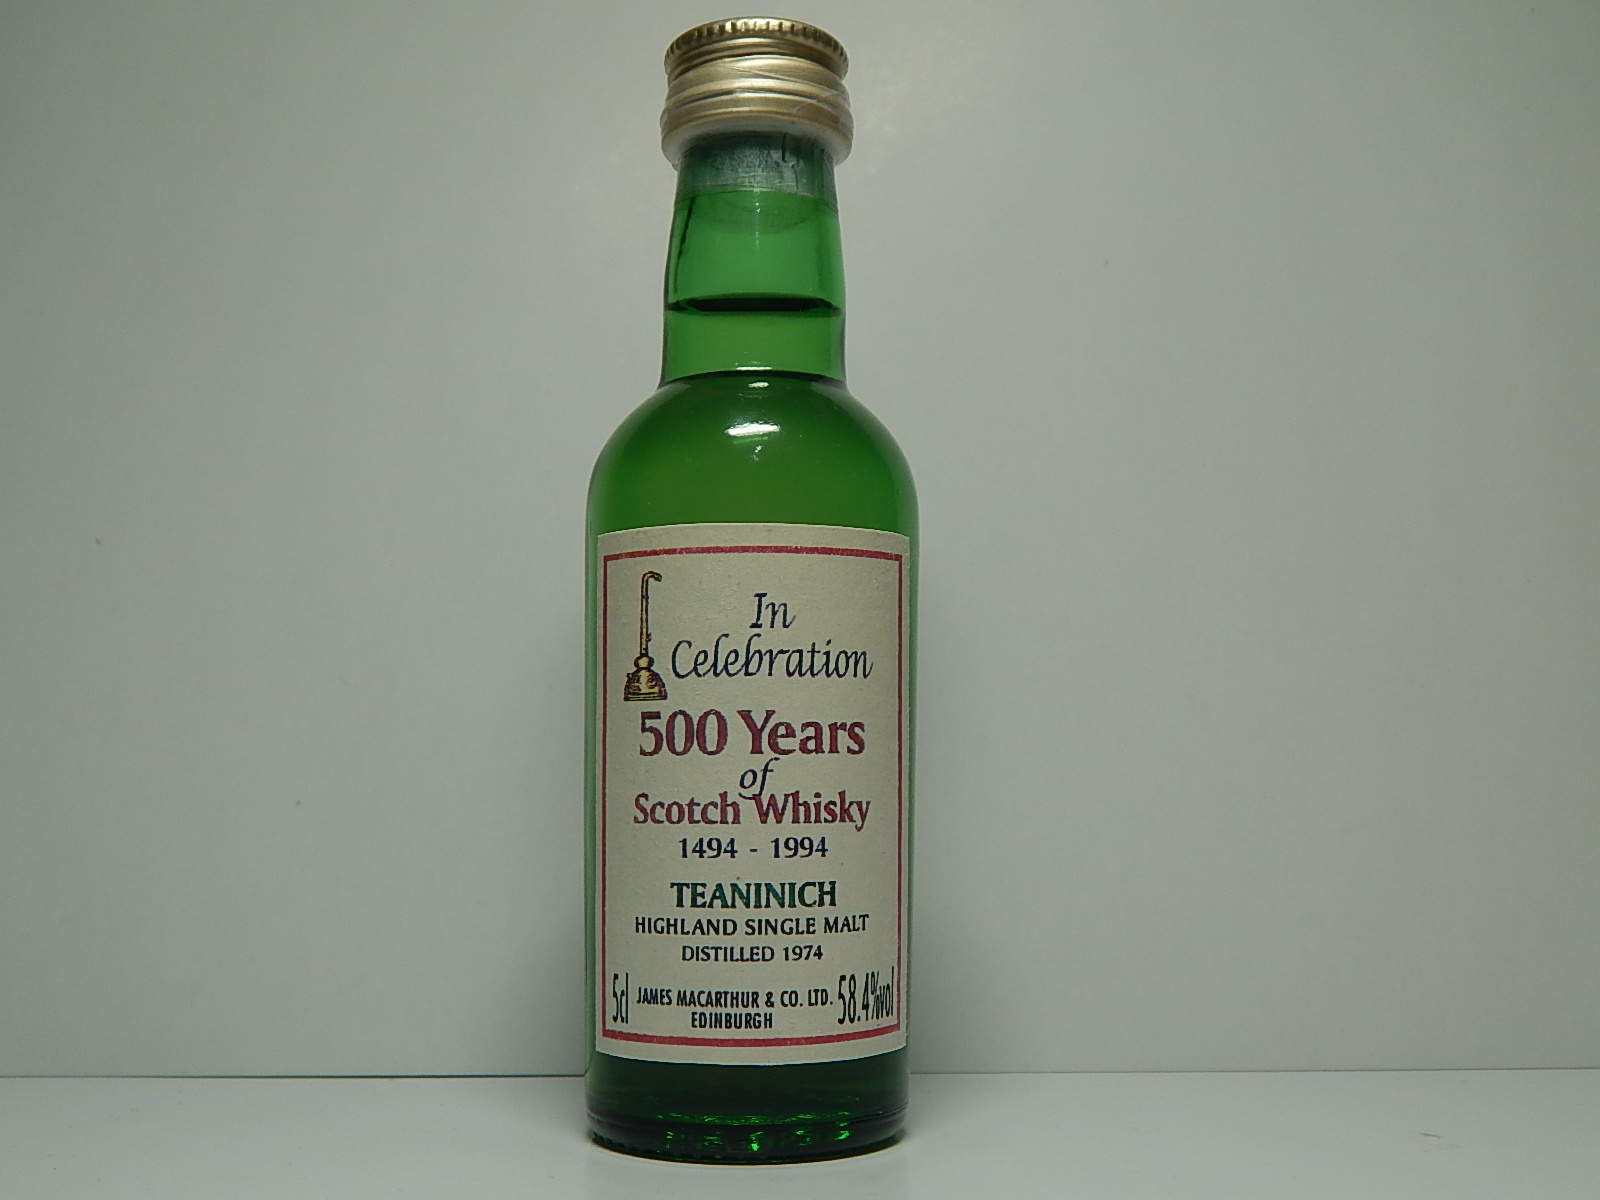 In Celebration 500 years HSMSW 1974 "James MacArthur´s" 5cl 58,4%vol